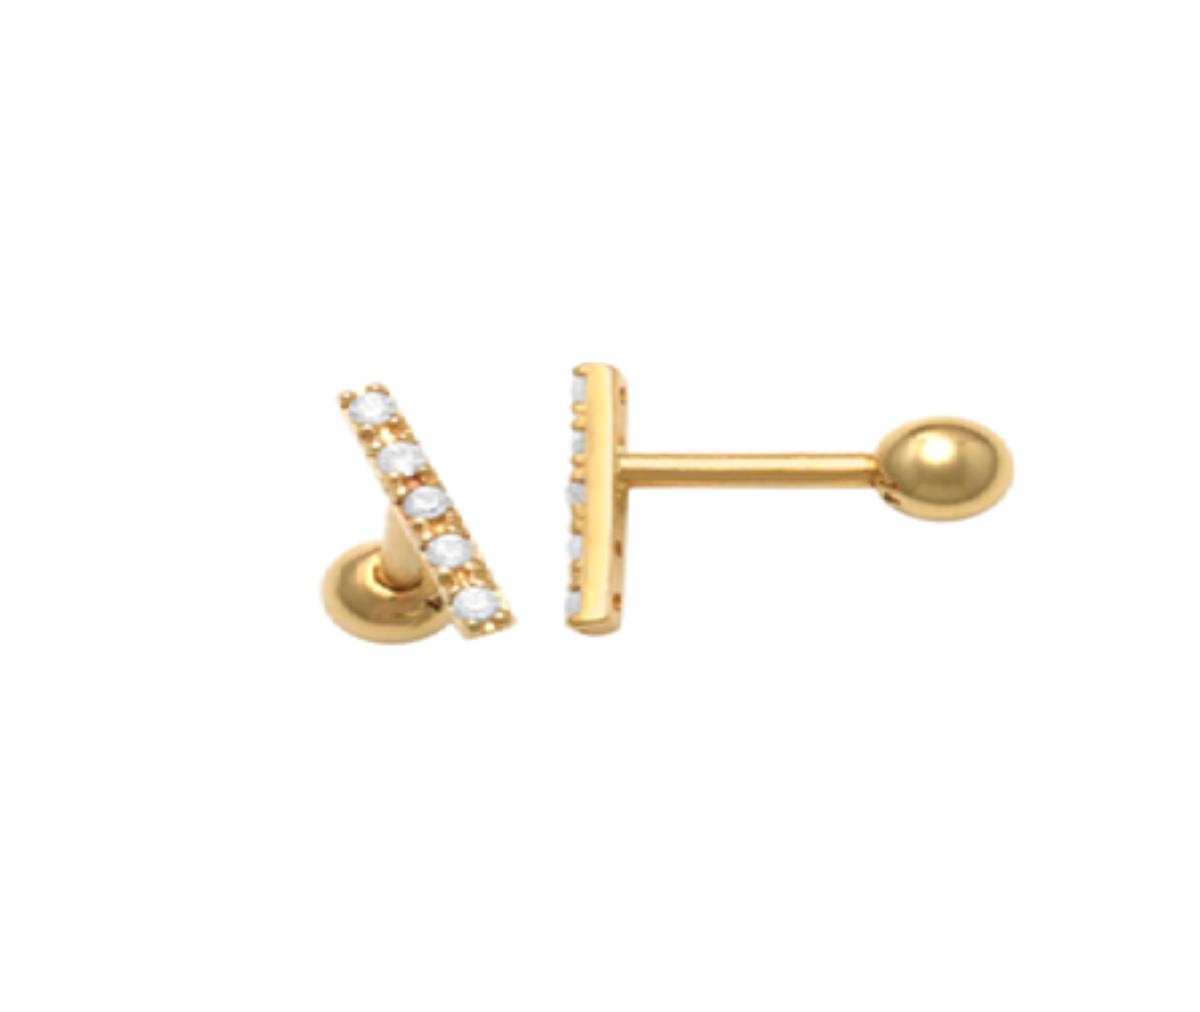 10K Yellow Gold 7.5x1mm Micropave Straight Bar Ear/Nose Stud with Ball Screw-Back